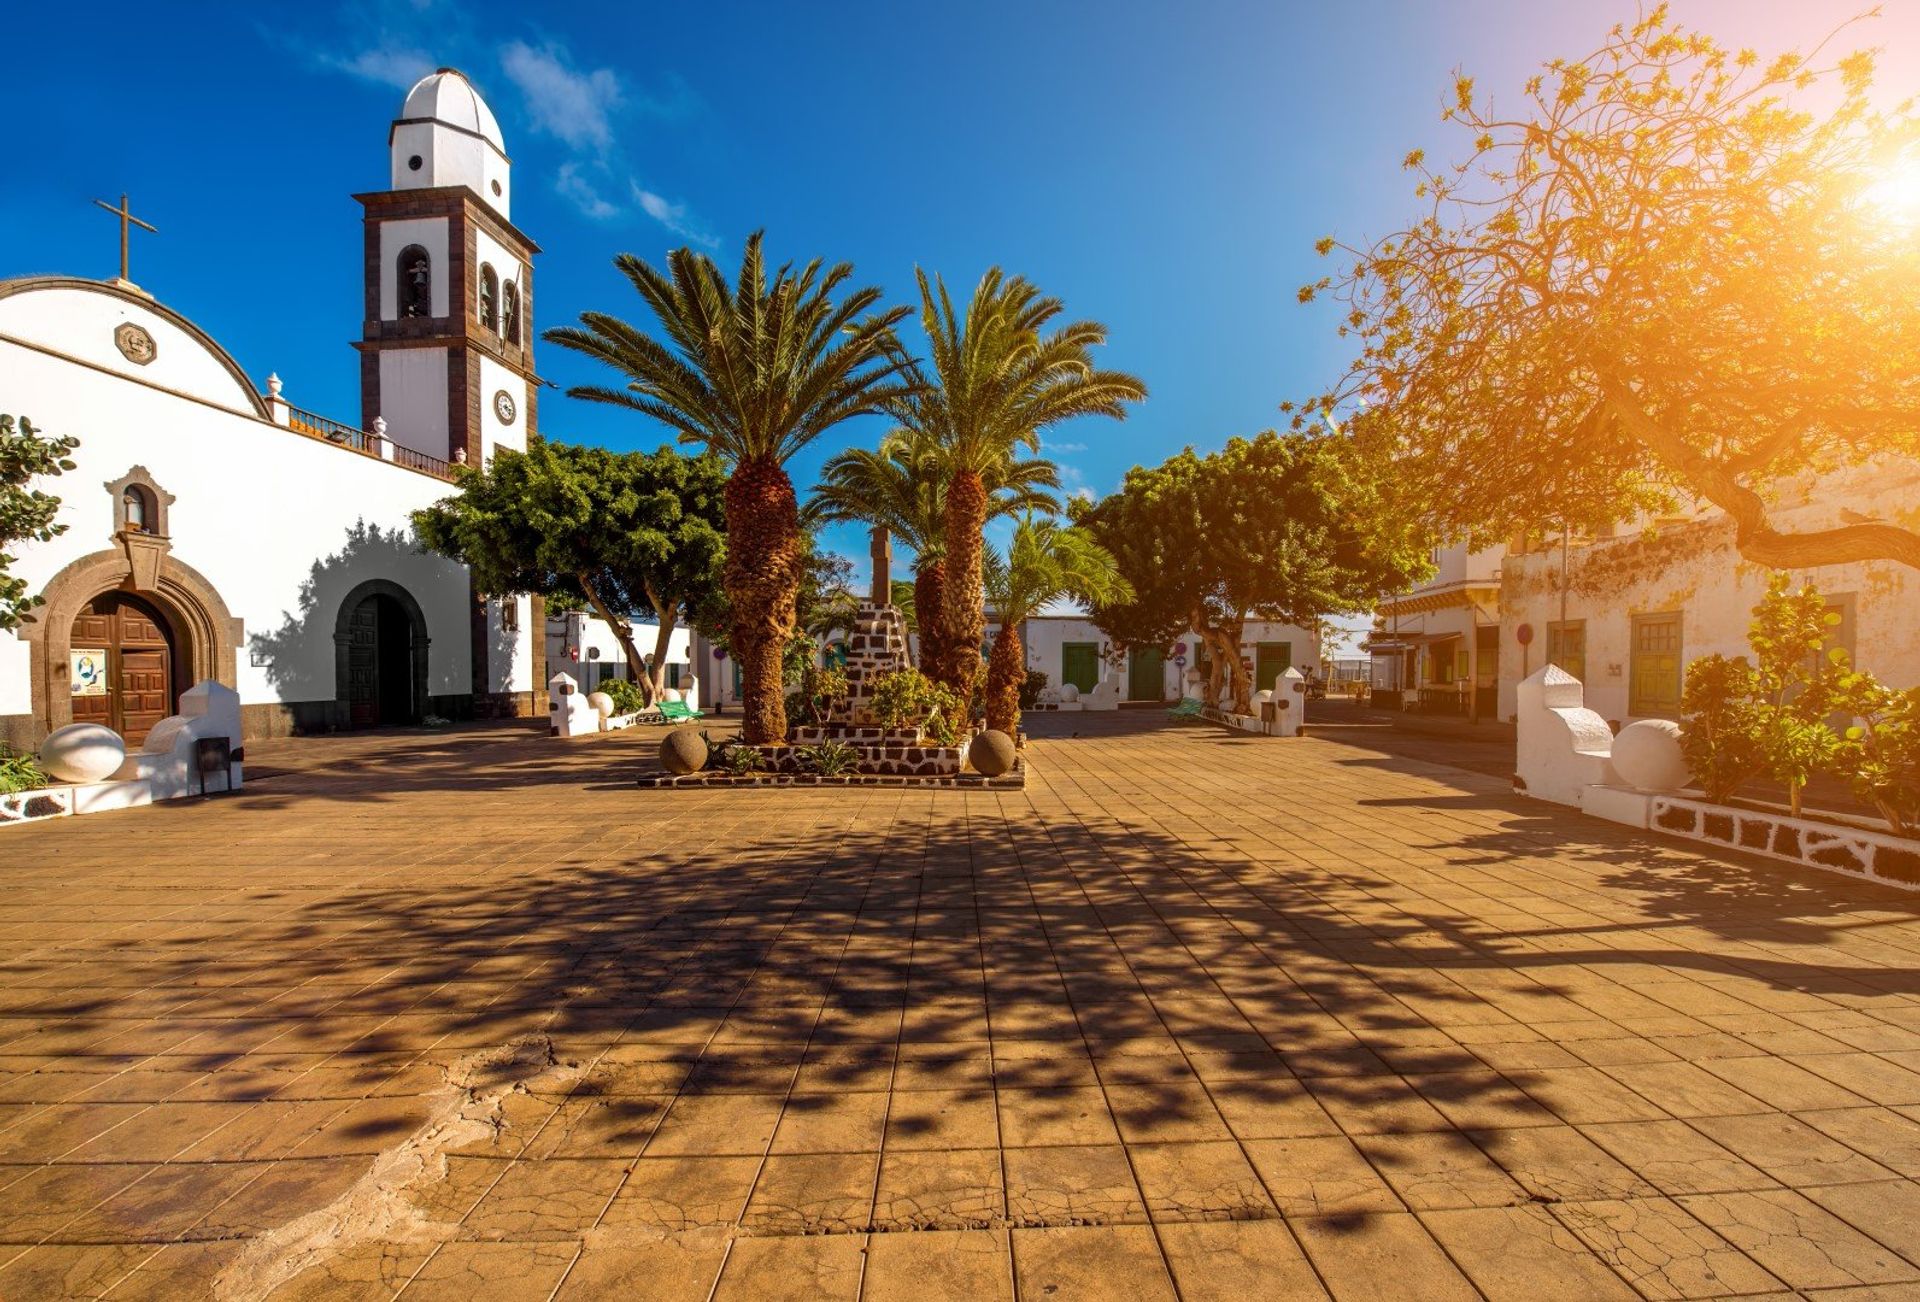 Admire the stunning architecture of San Gines Church in the heart of Arrecife's old town in Lanzarote